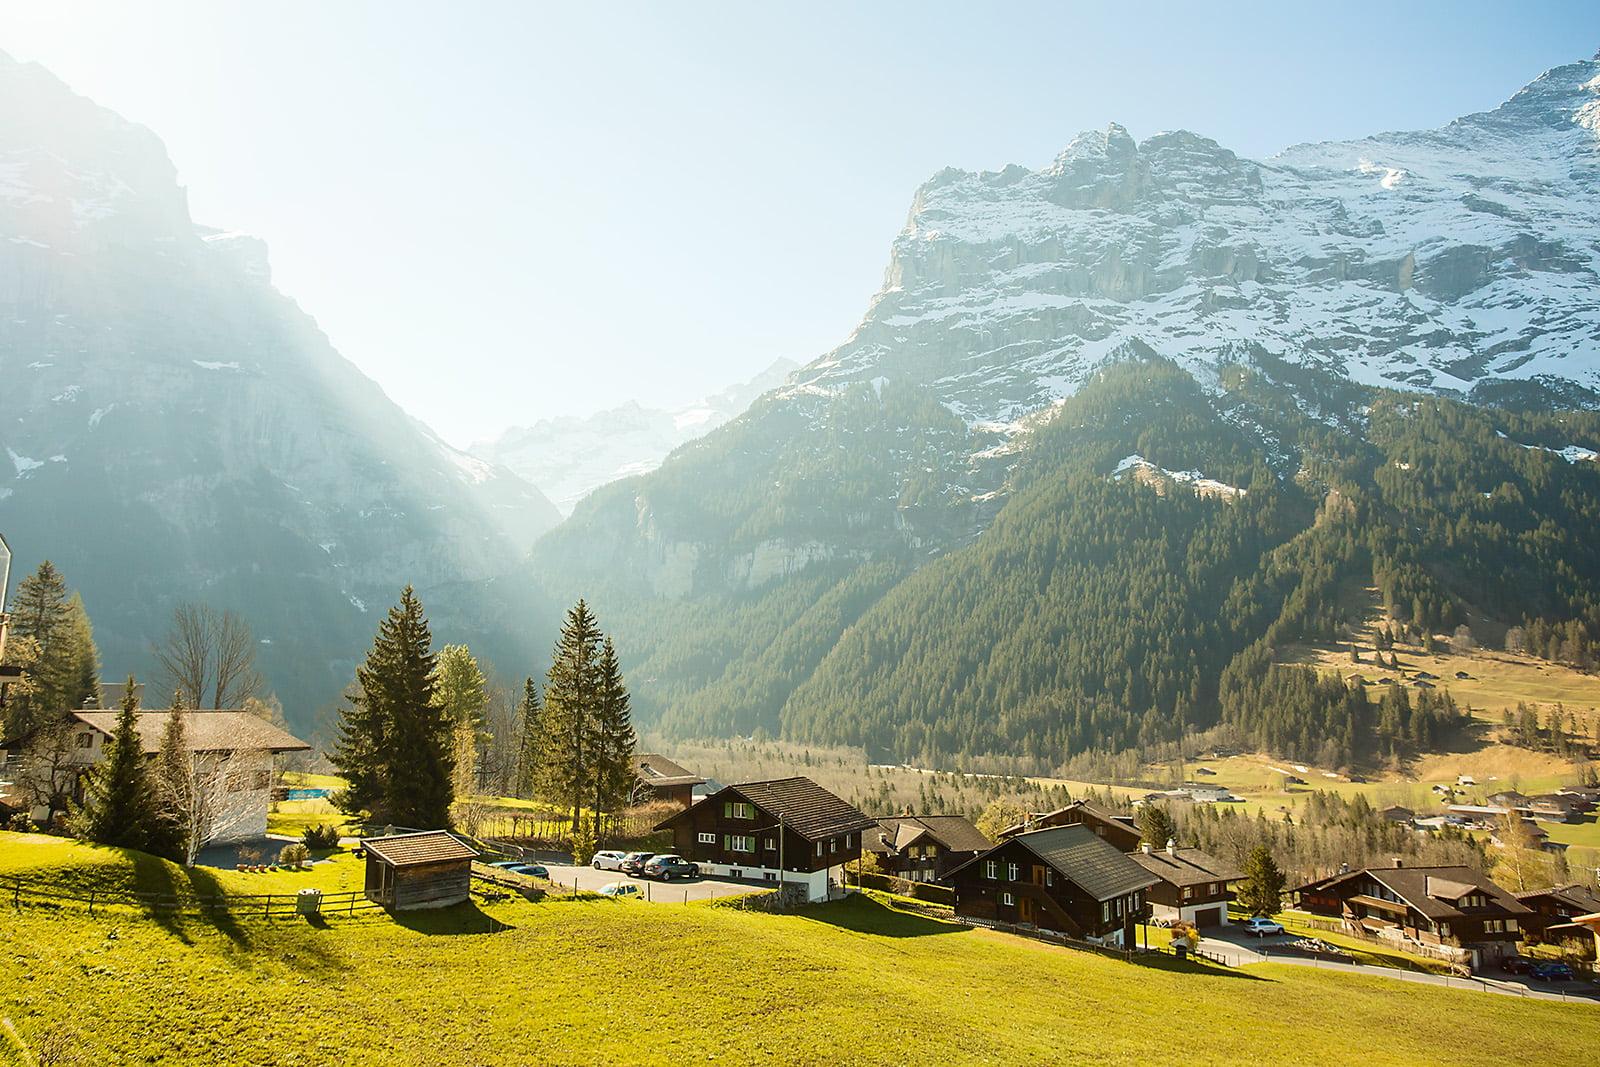 Landscape photograph of town near mountains, grindelwald